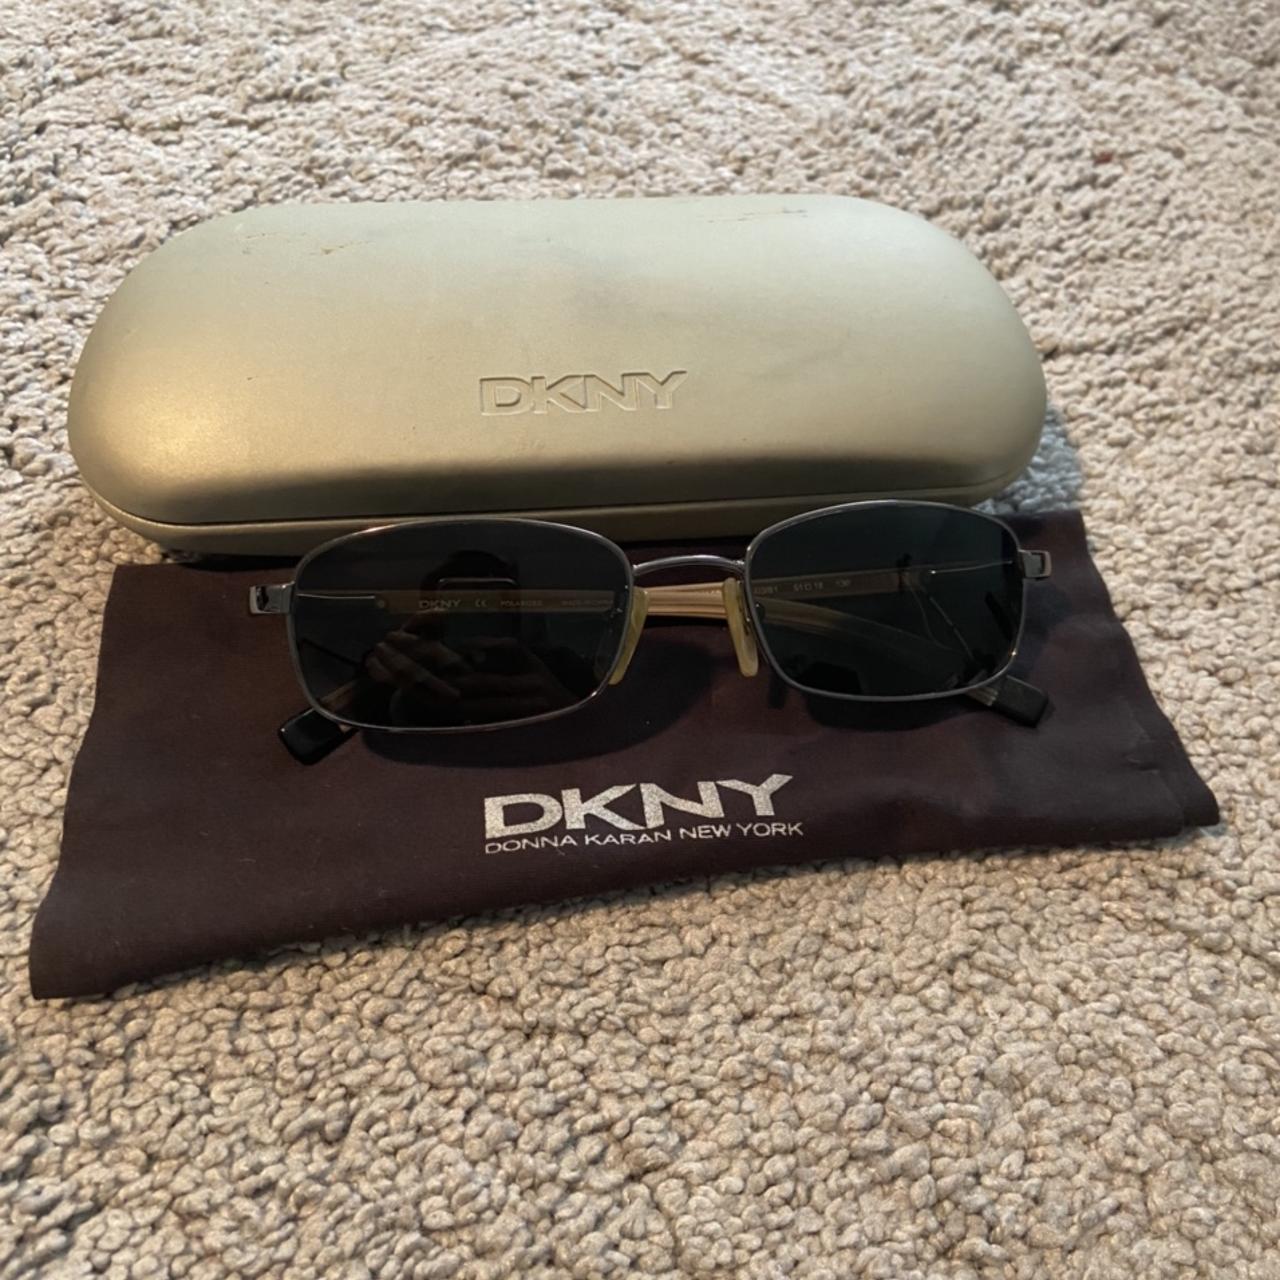 DKNY Women's Tan and Brown Sunglasses